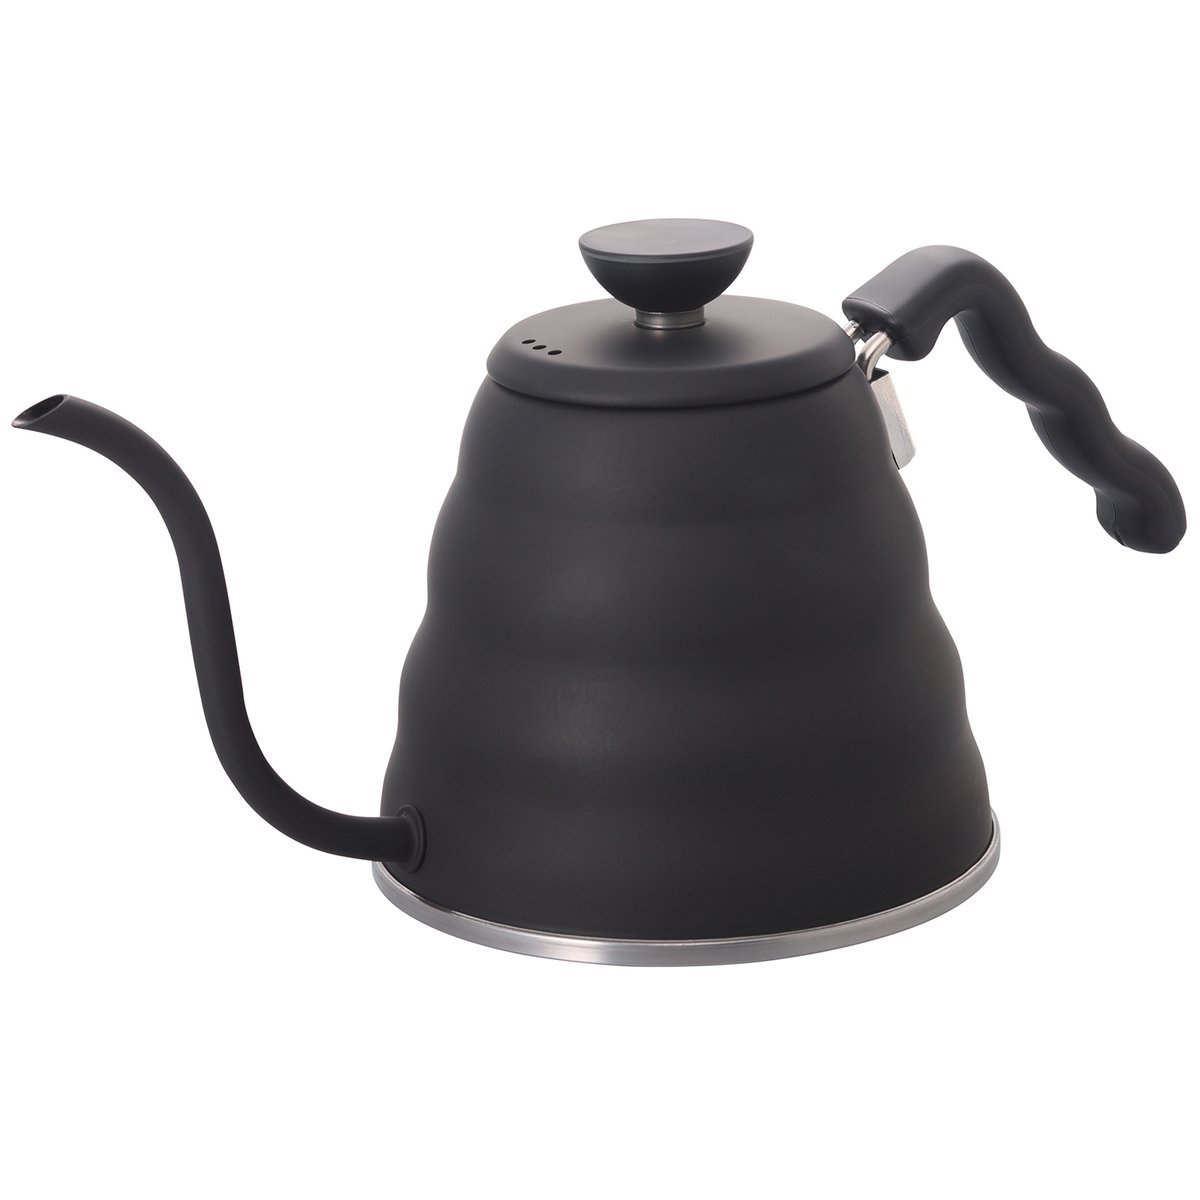 Ch-ih Japanese Pour Over Coffee and Tea Kettle Drip Pot 1.2 Liter